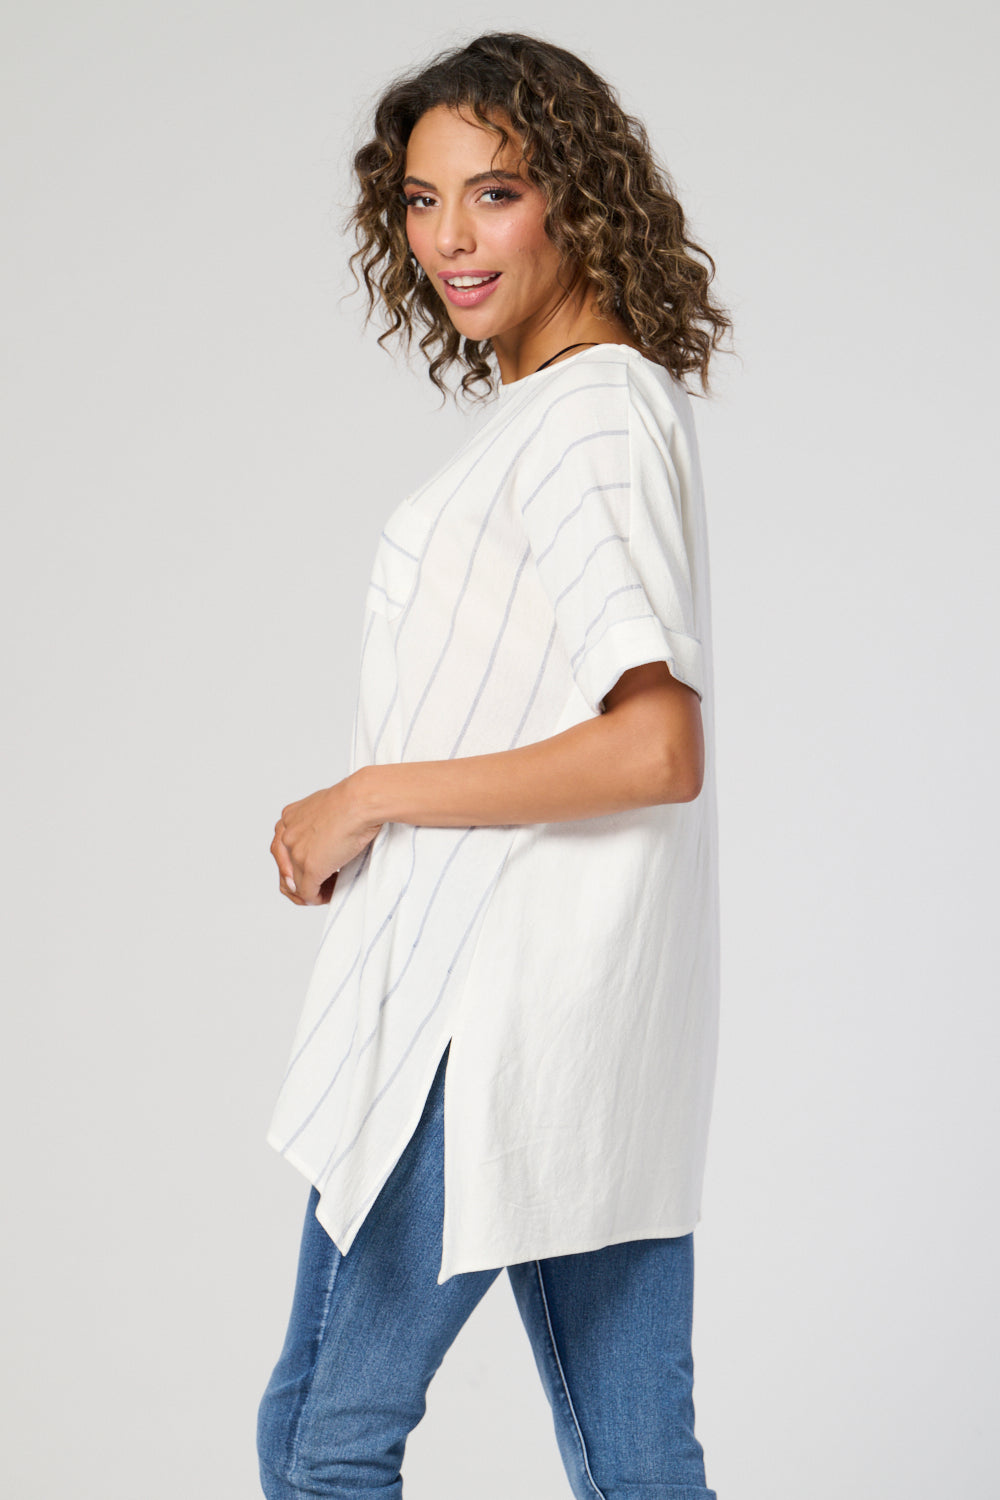 Saloos Striped Panelled Top with Necklace